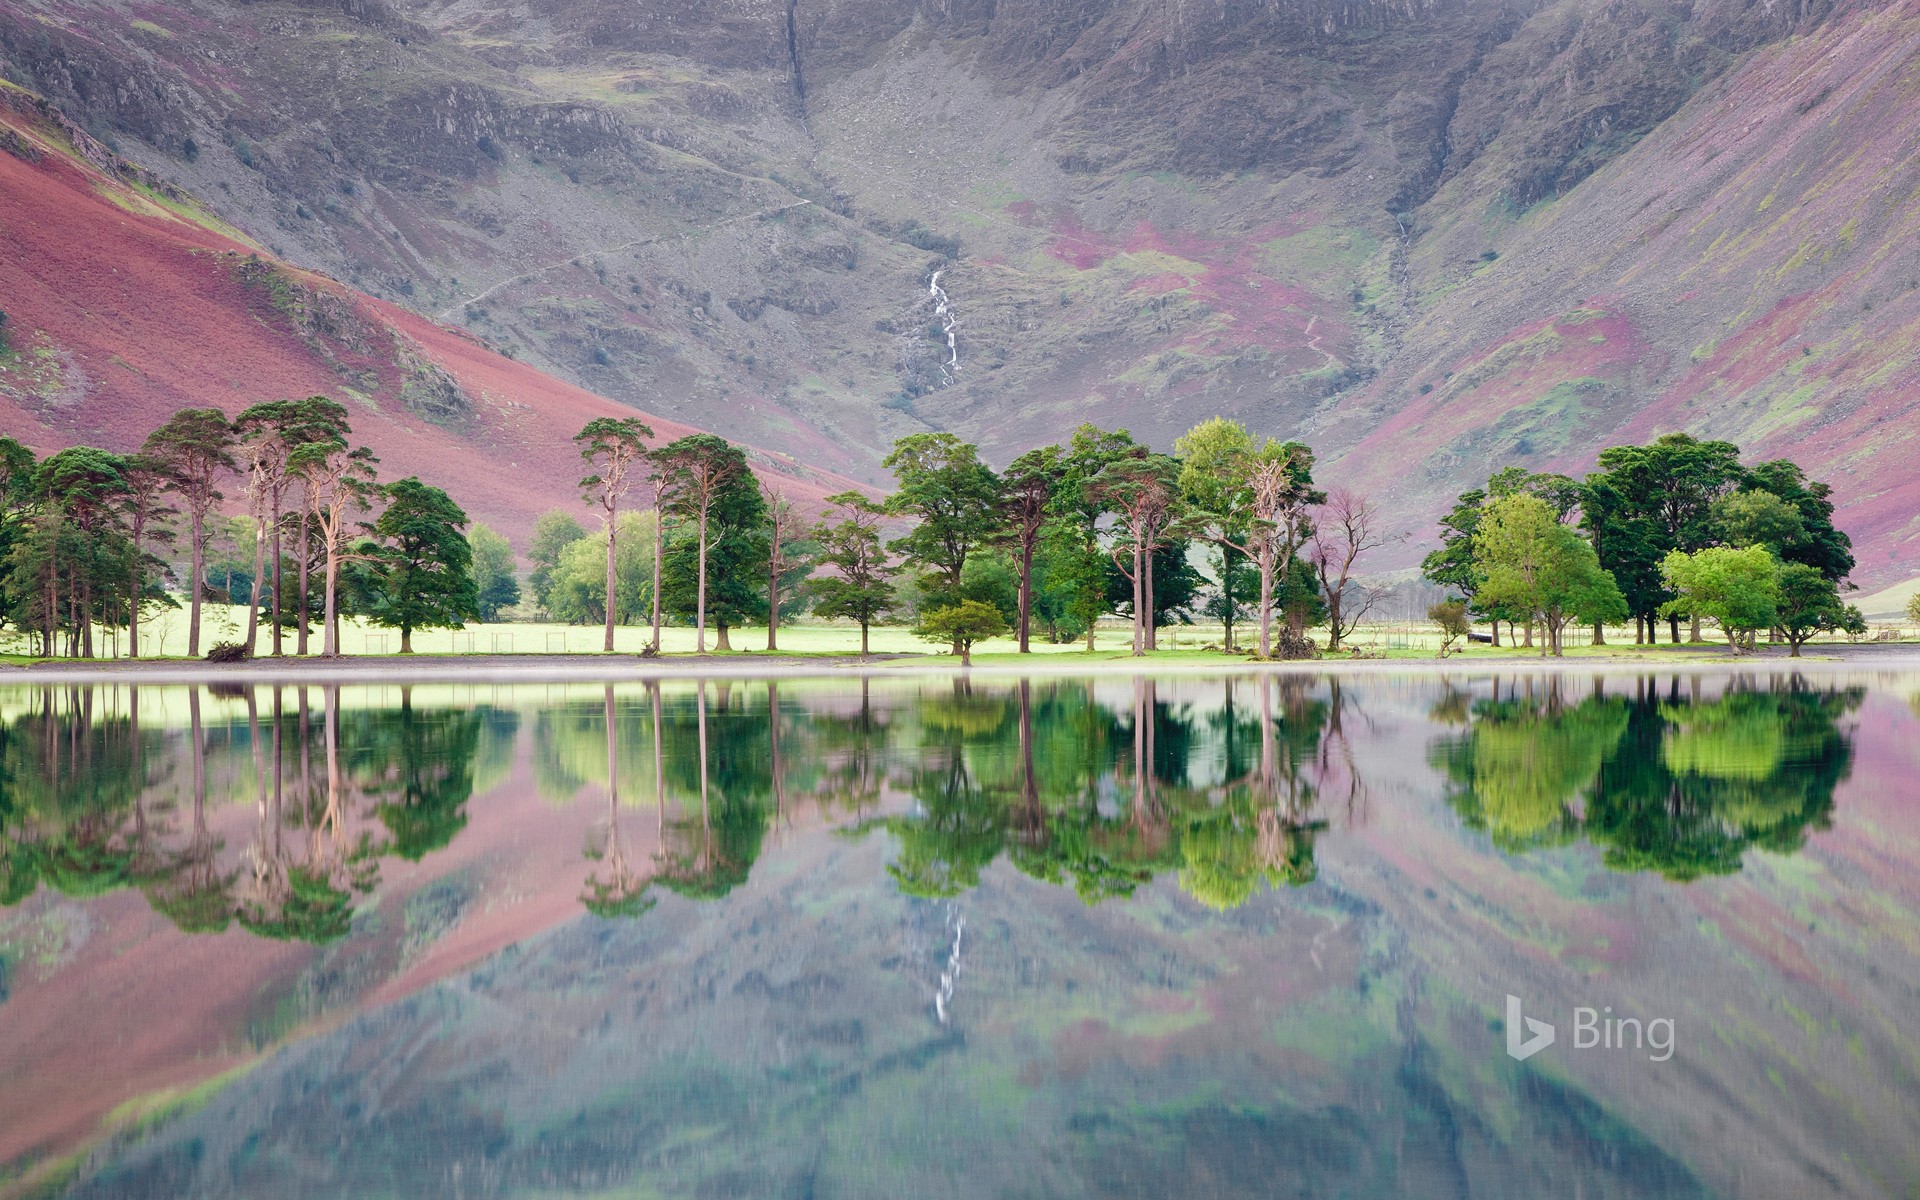 Buttermere in the Lake District, North West England